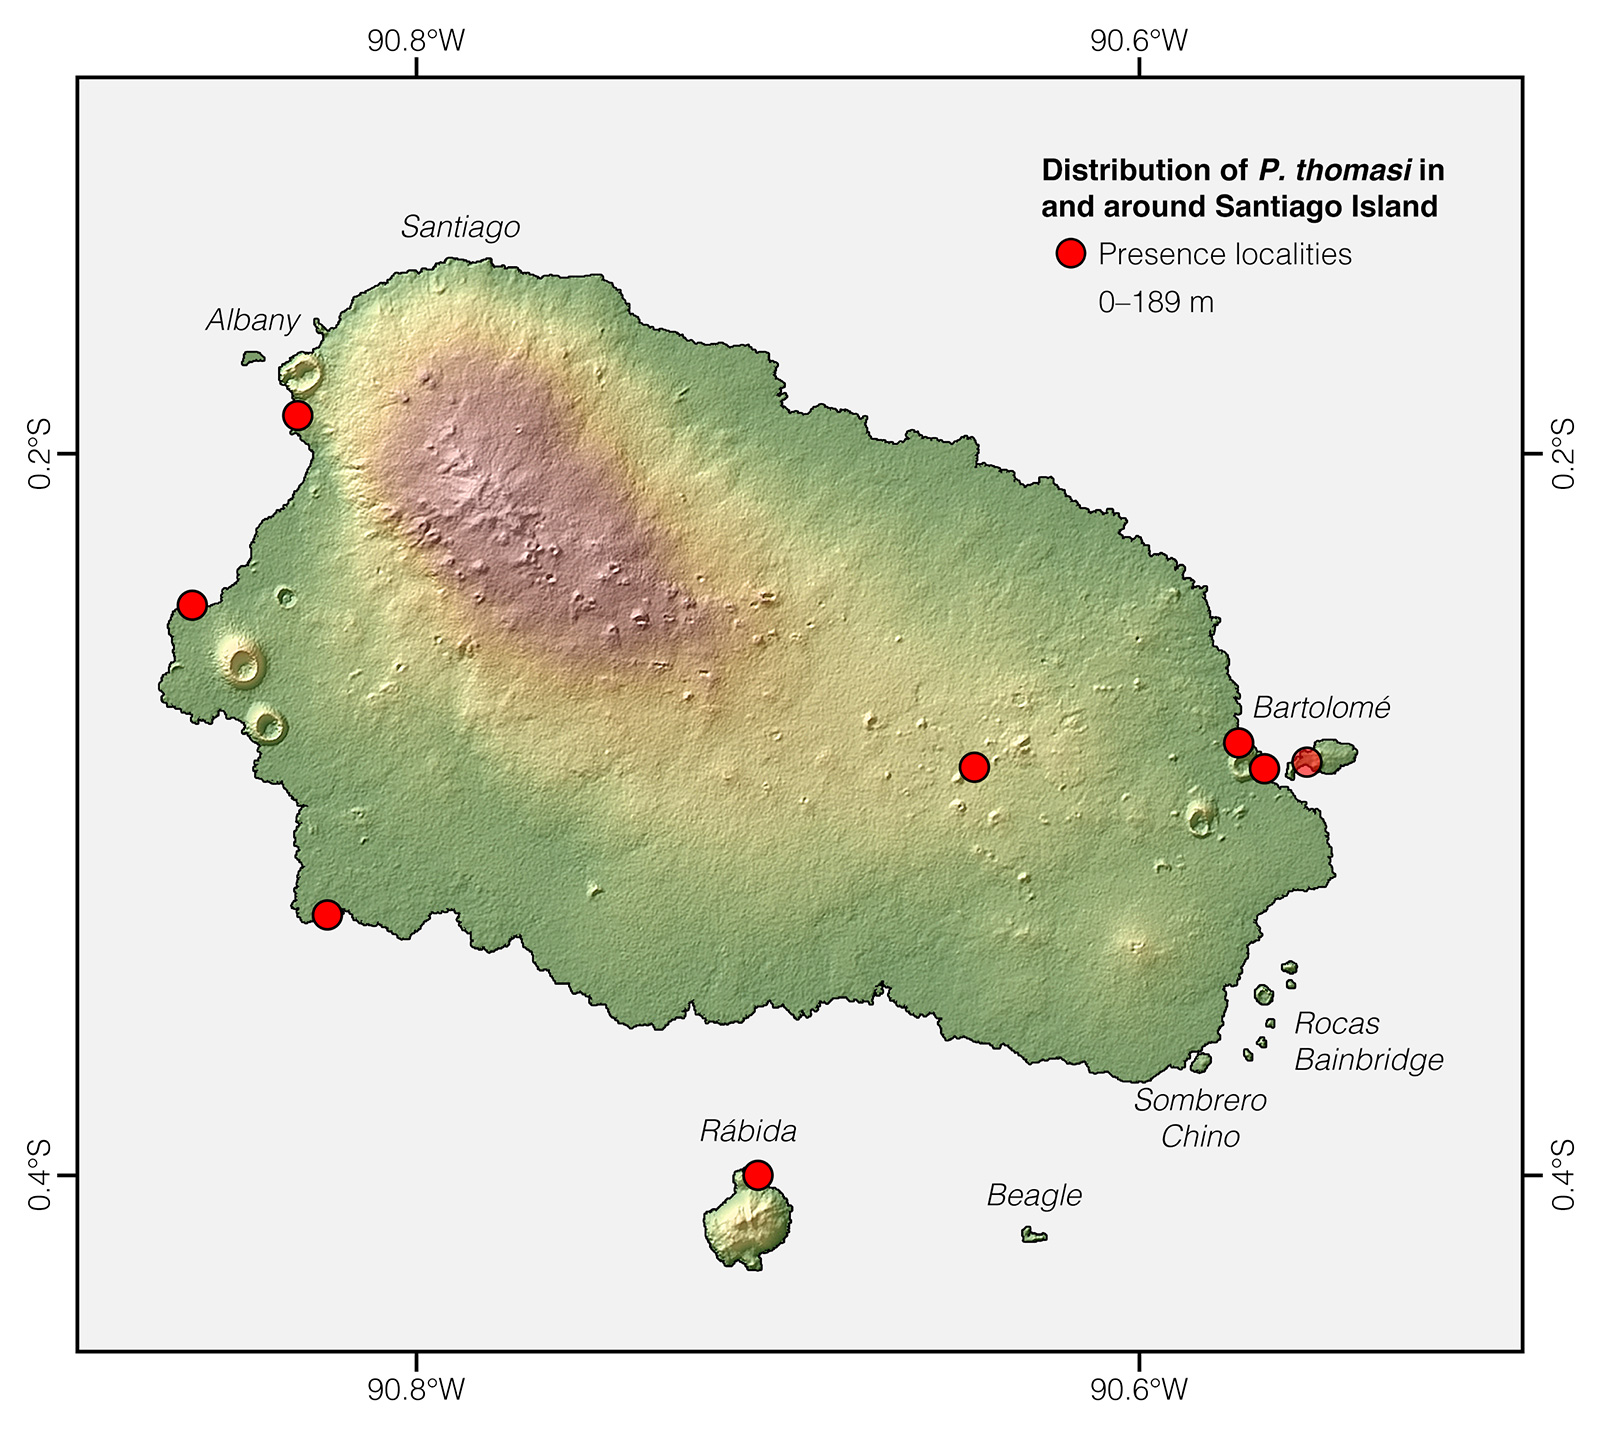 Distribution of Pseudalsophis thomasi in and around Santiago Island